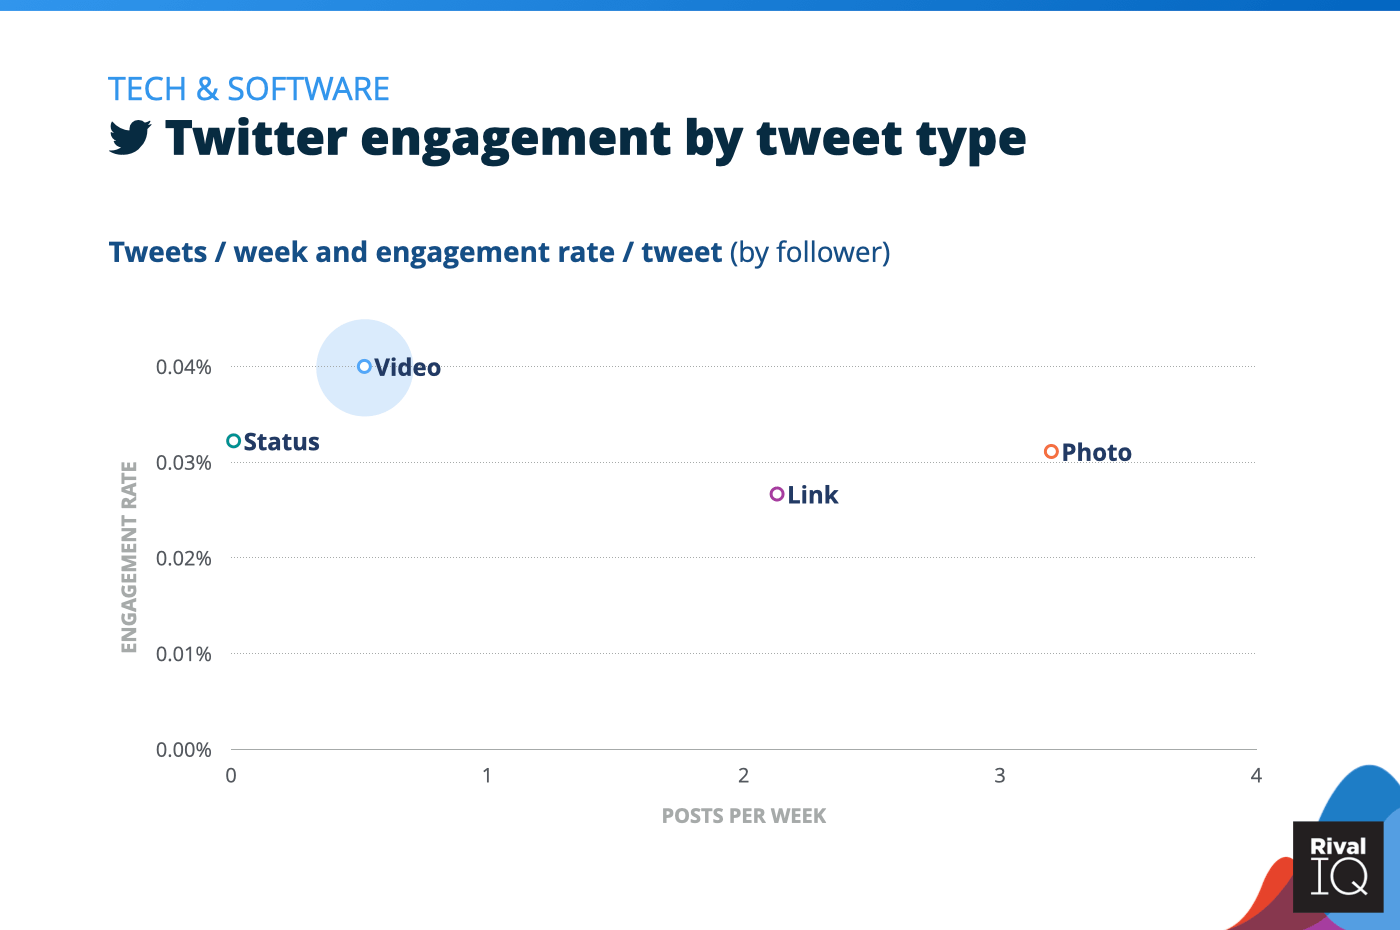 Chart of Twitter posts per week and engagement rate by tweet type, Tech & Software